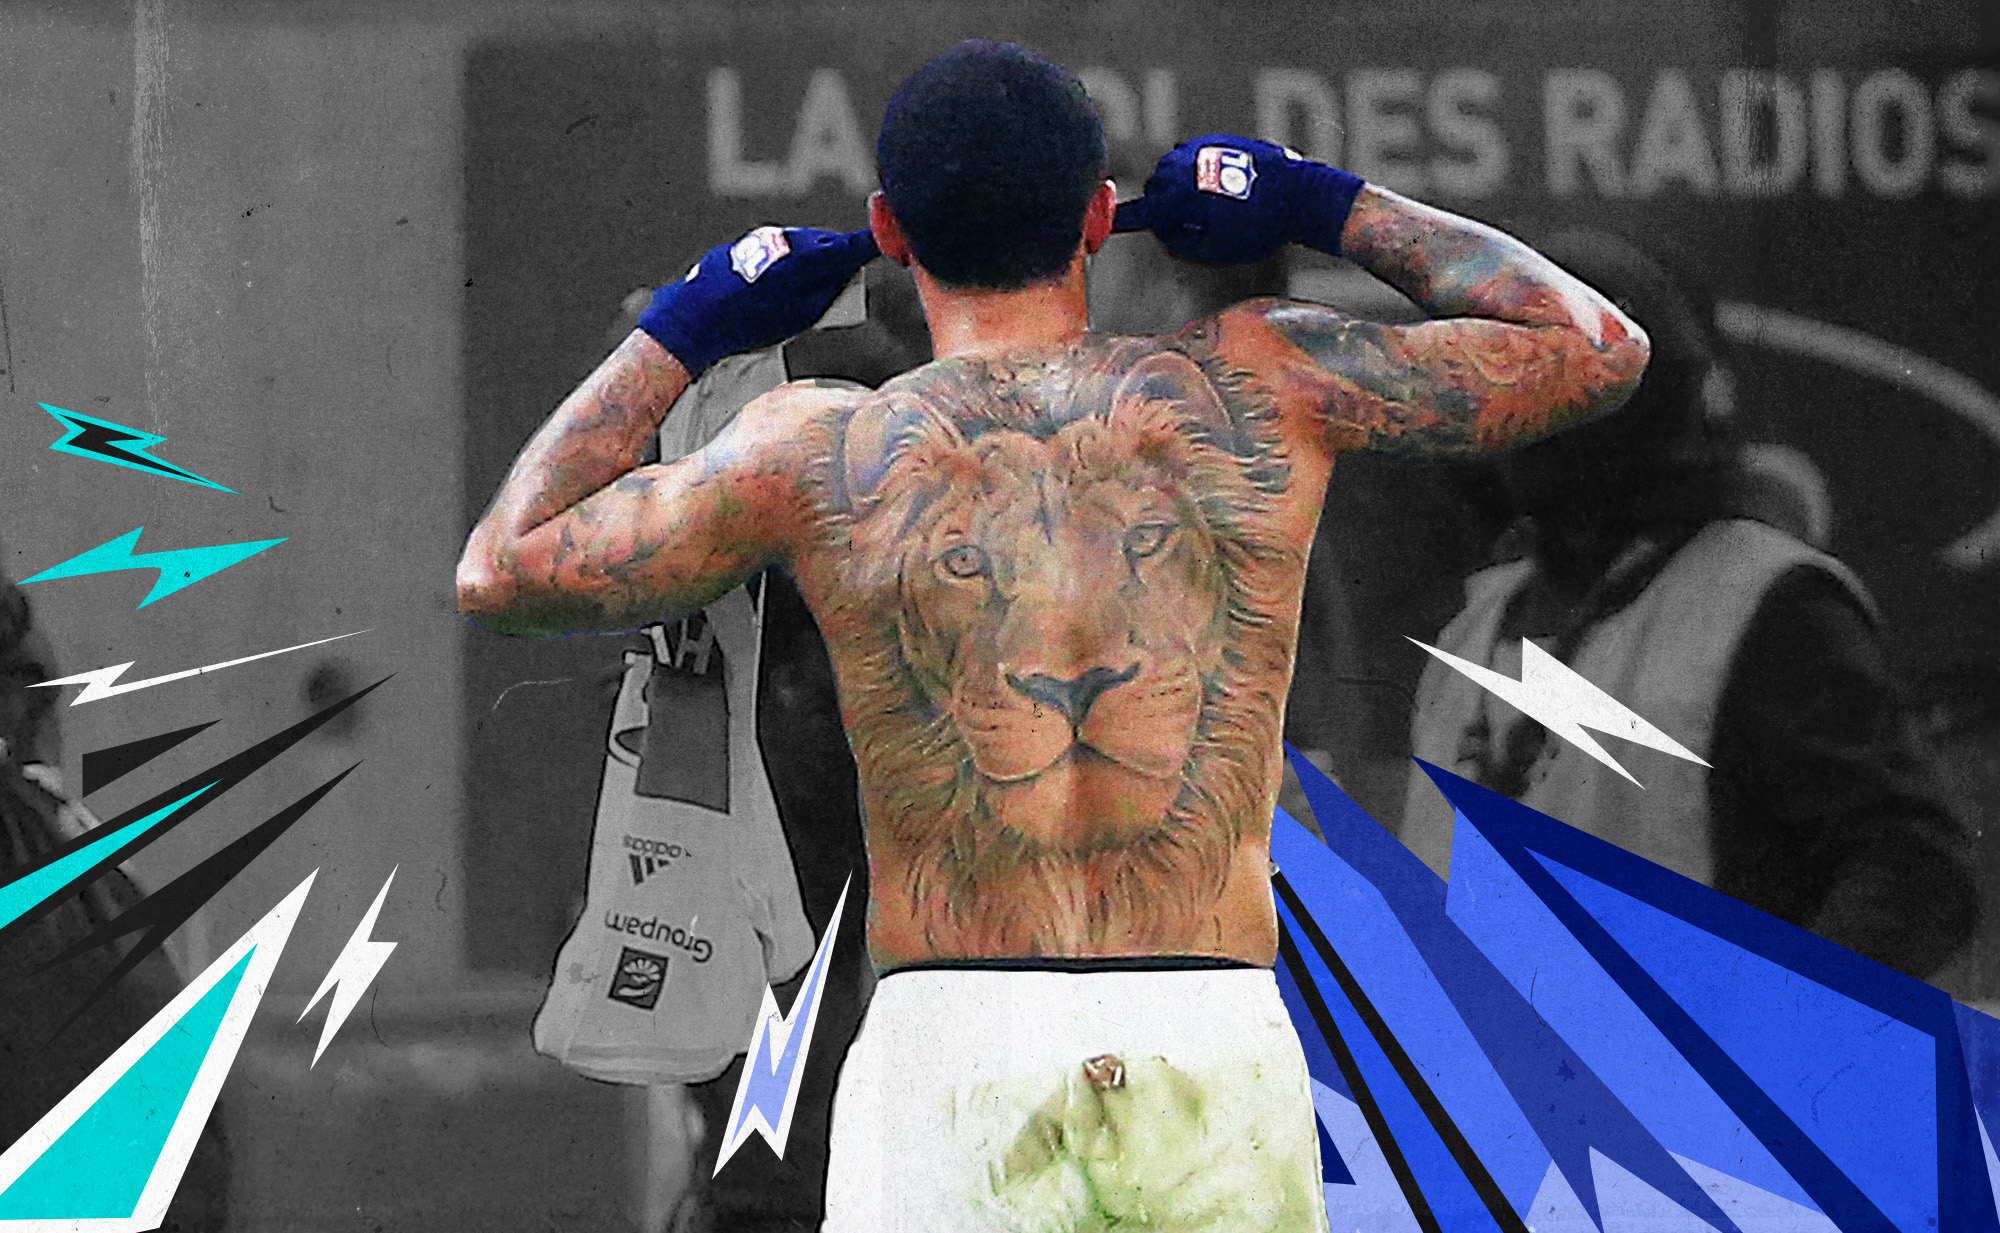 Memphis Depay flexing while shirtless, displaying a tattoo of a lion’s face that covers his entire back.